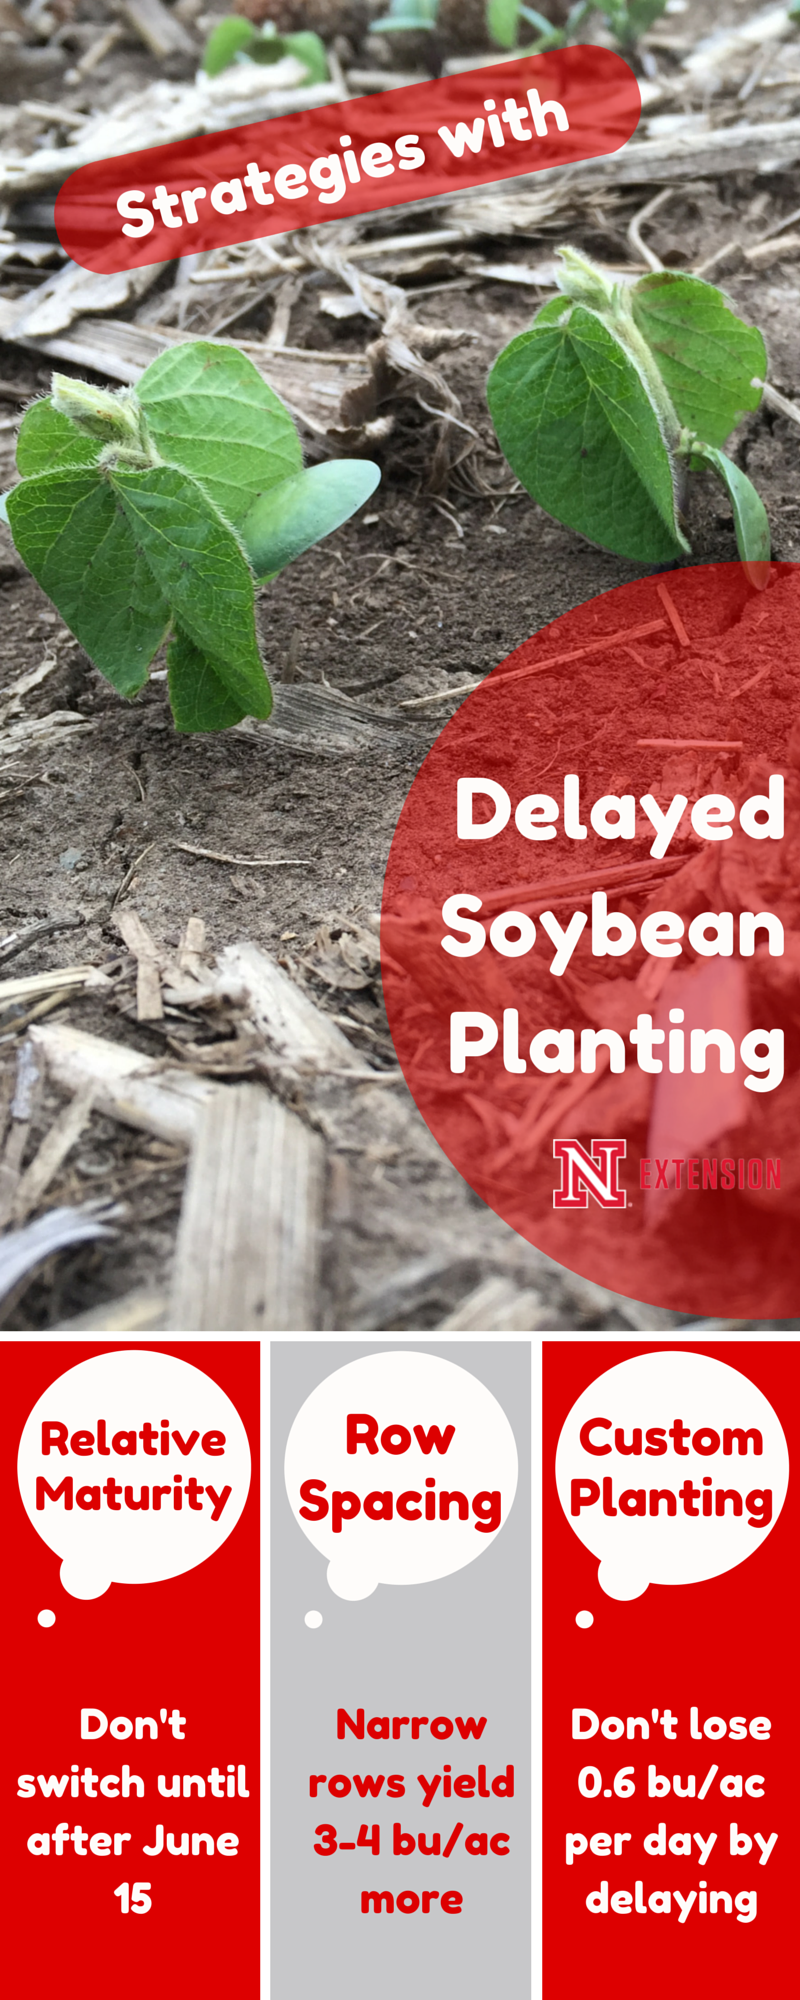 Benefits of delayed planting